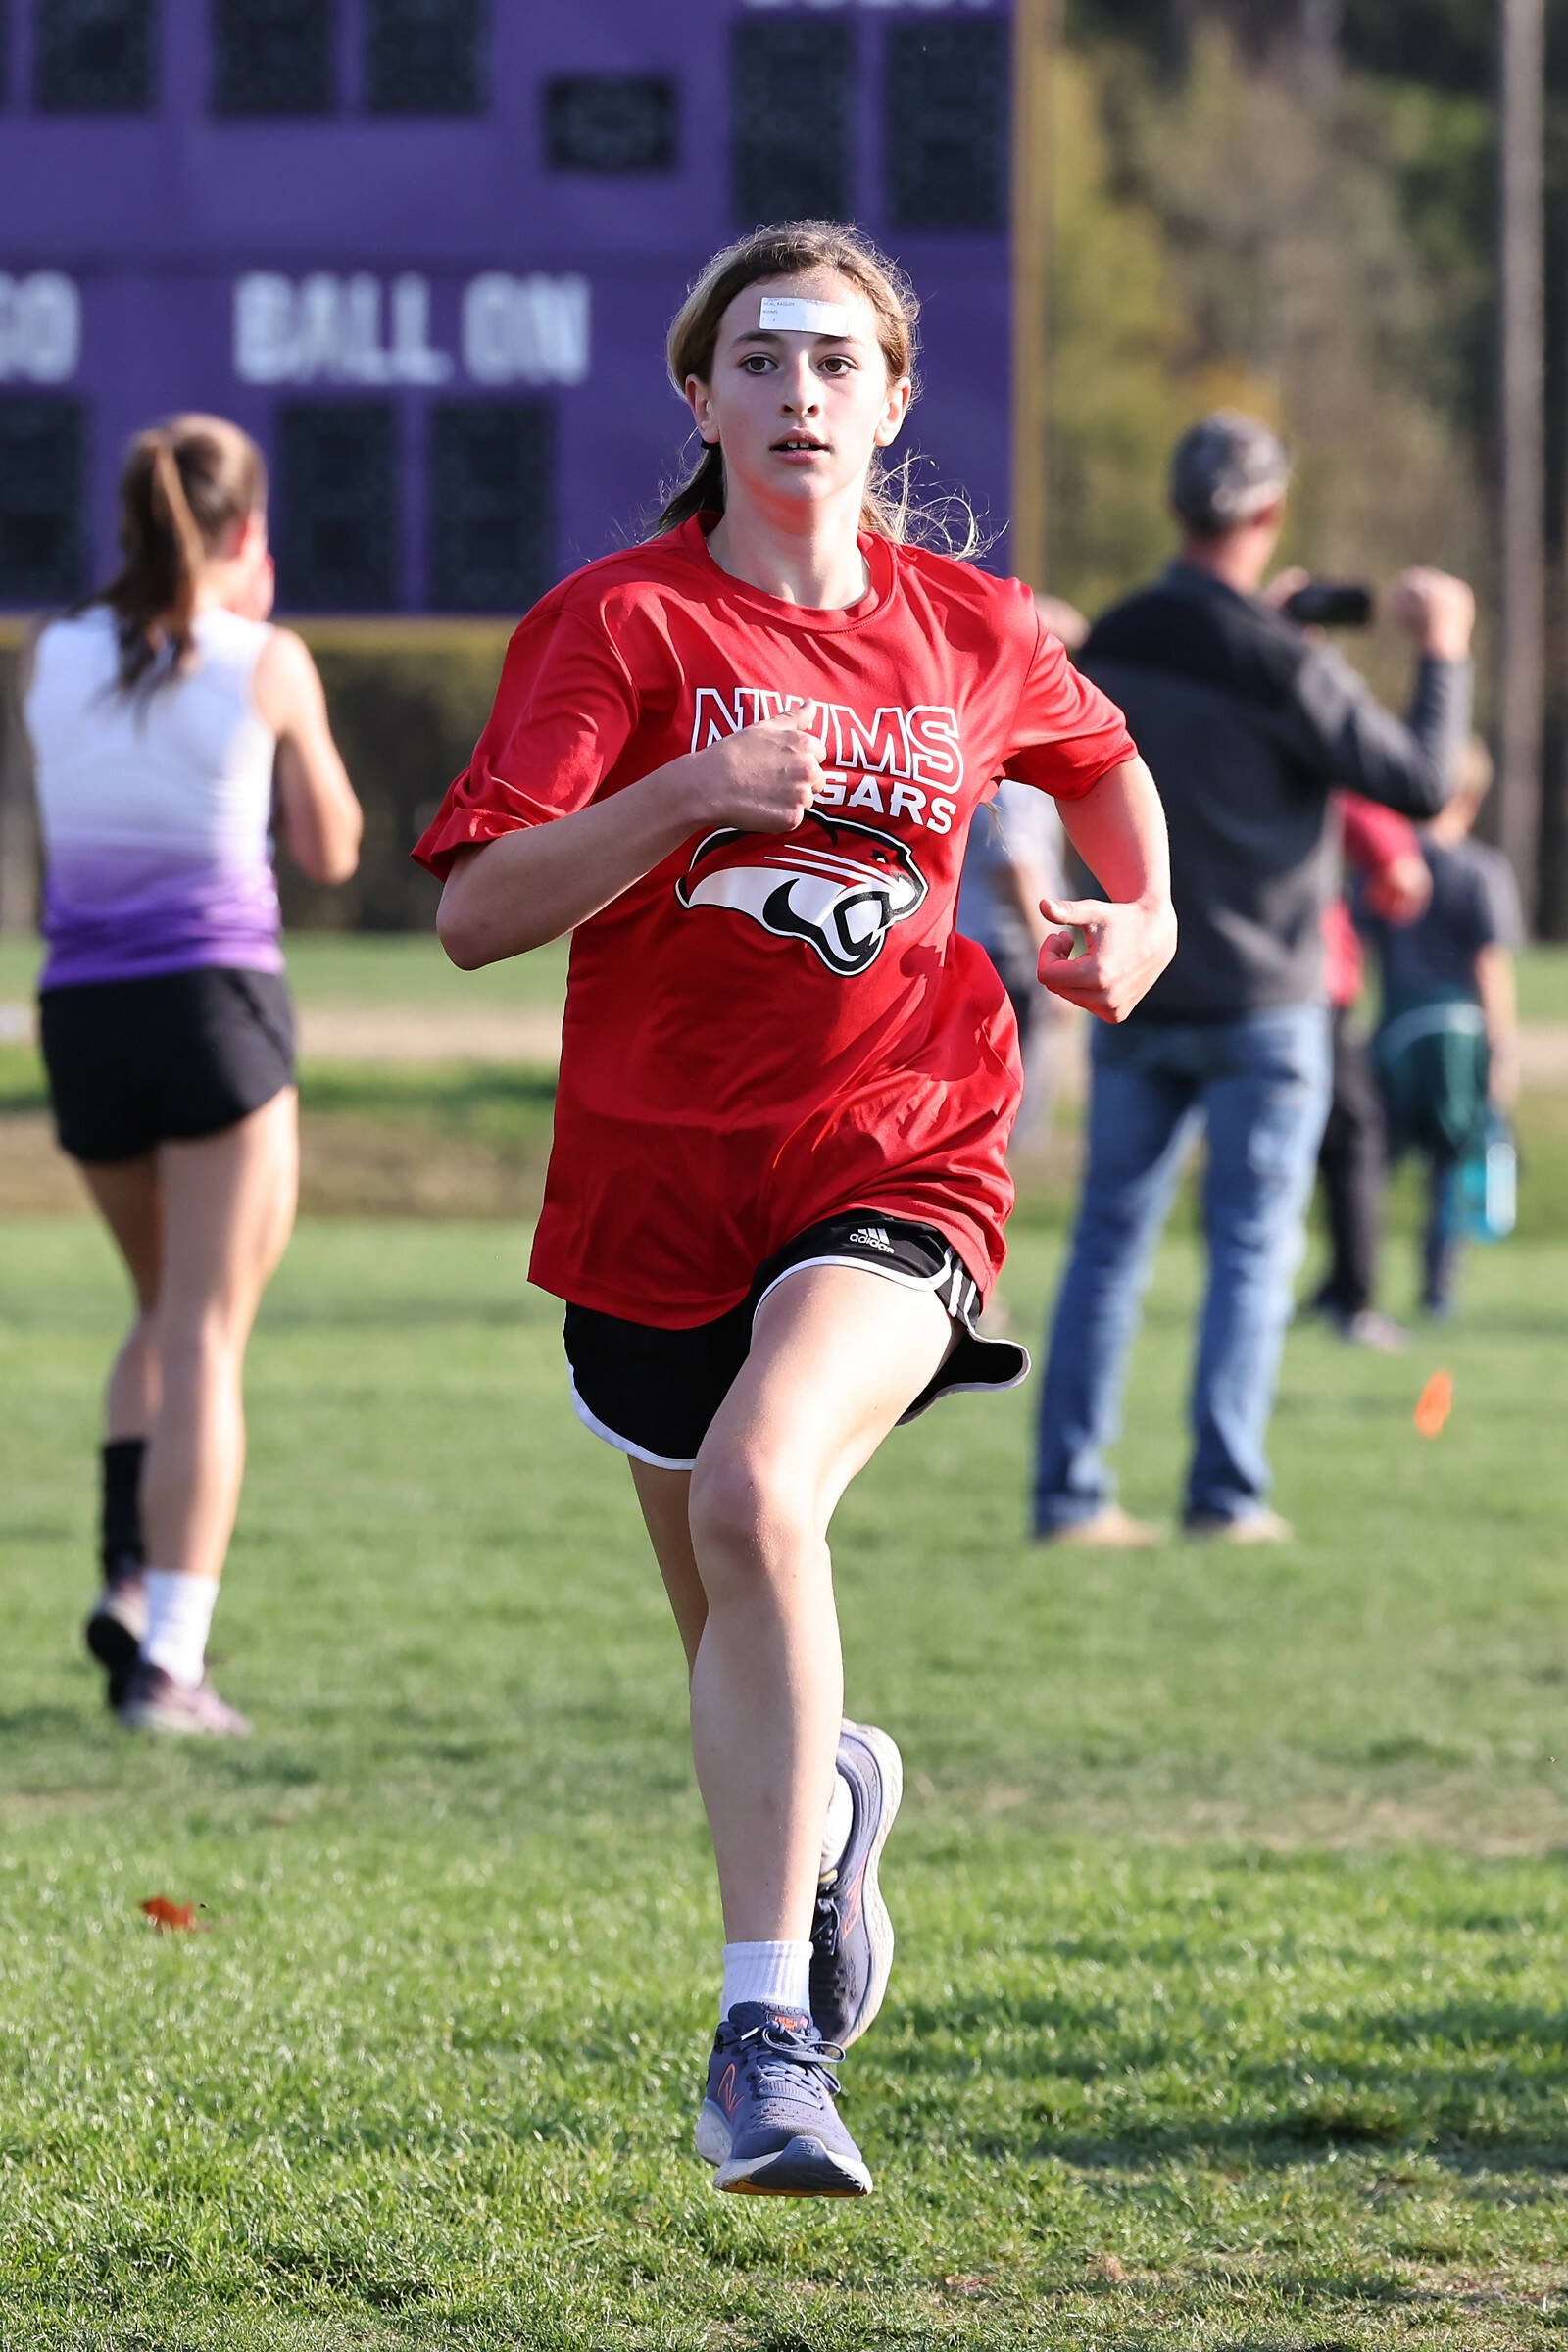 Photo by John Fisken
North Whidbey Middle School seventh grader Kassidy Neal races in the cross country league championships at Ft. Nugent Park Oct. 18. Neal finished third place in this race, and all her other races this season.